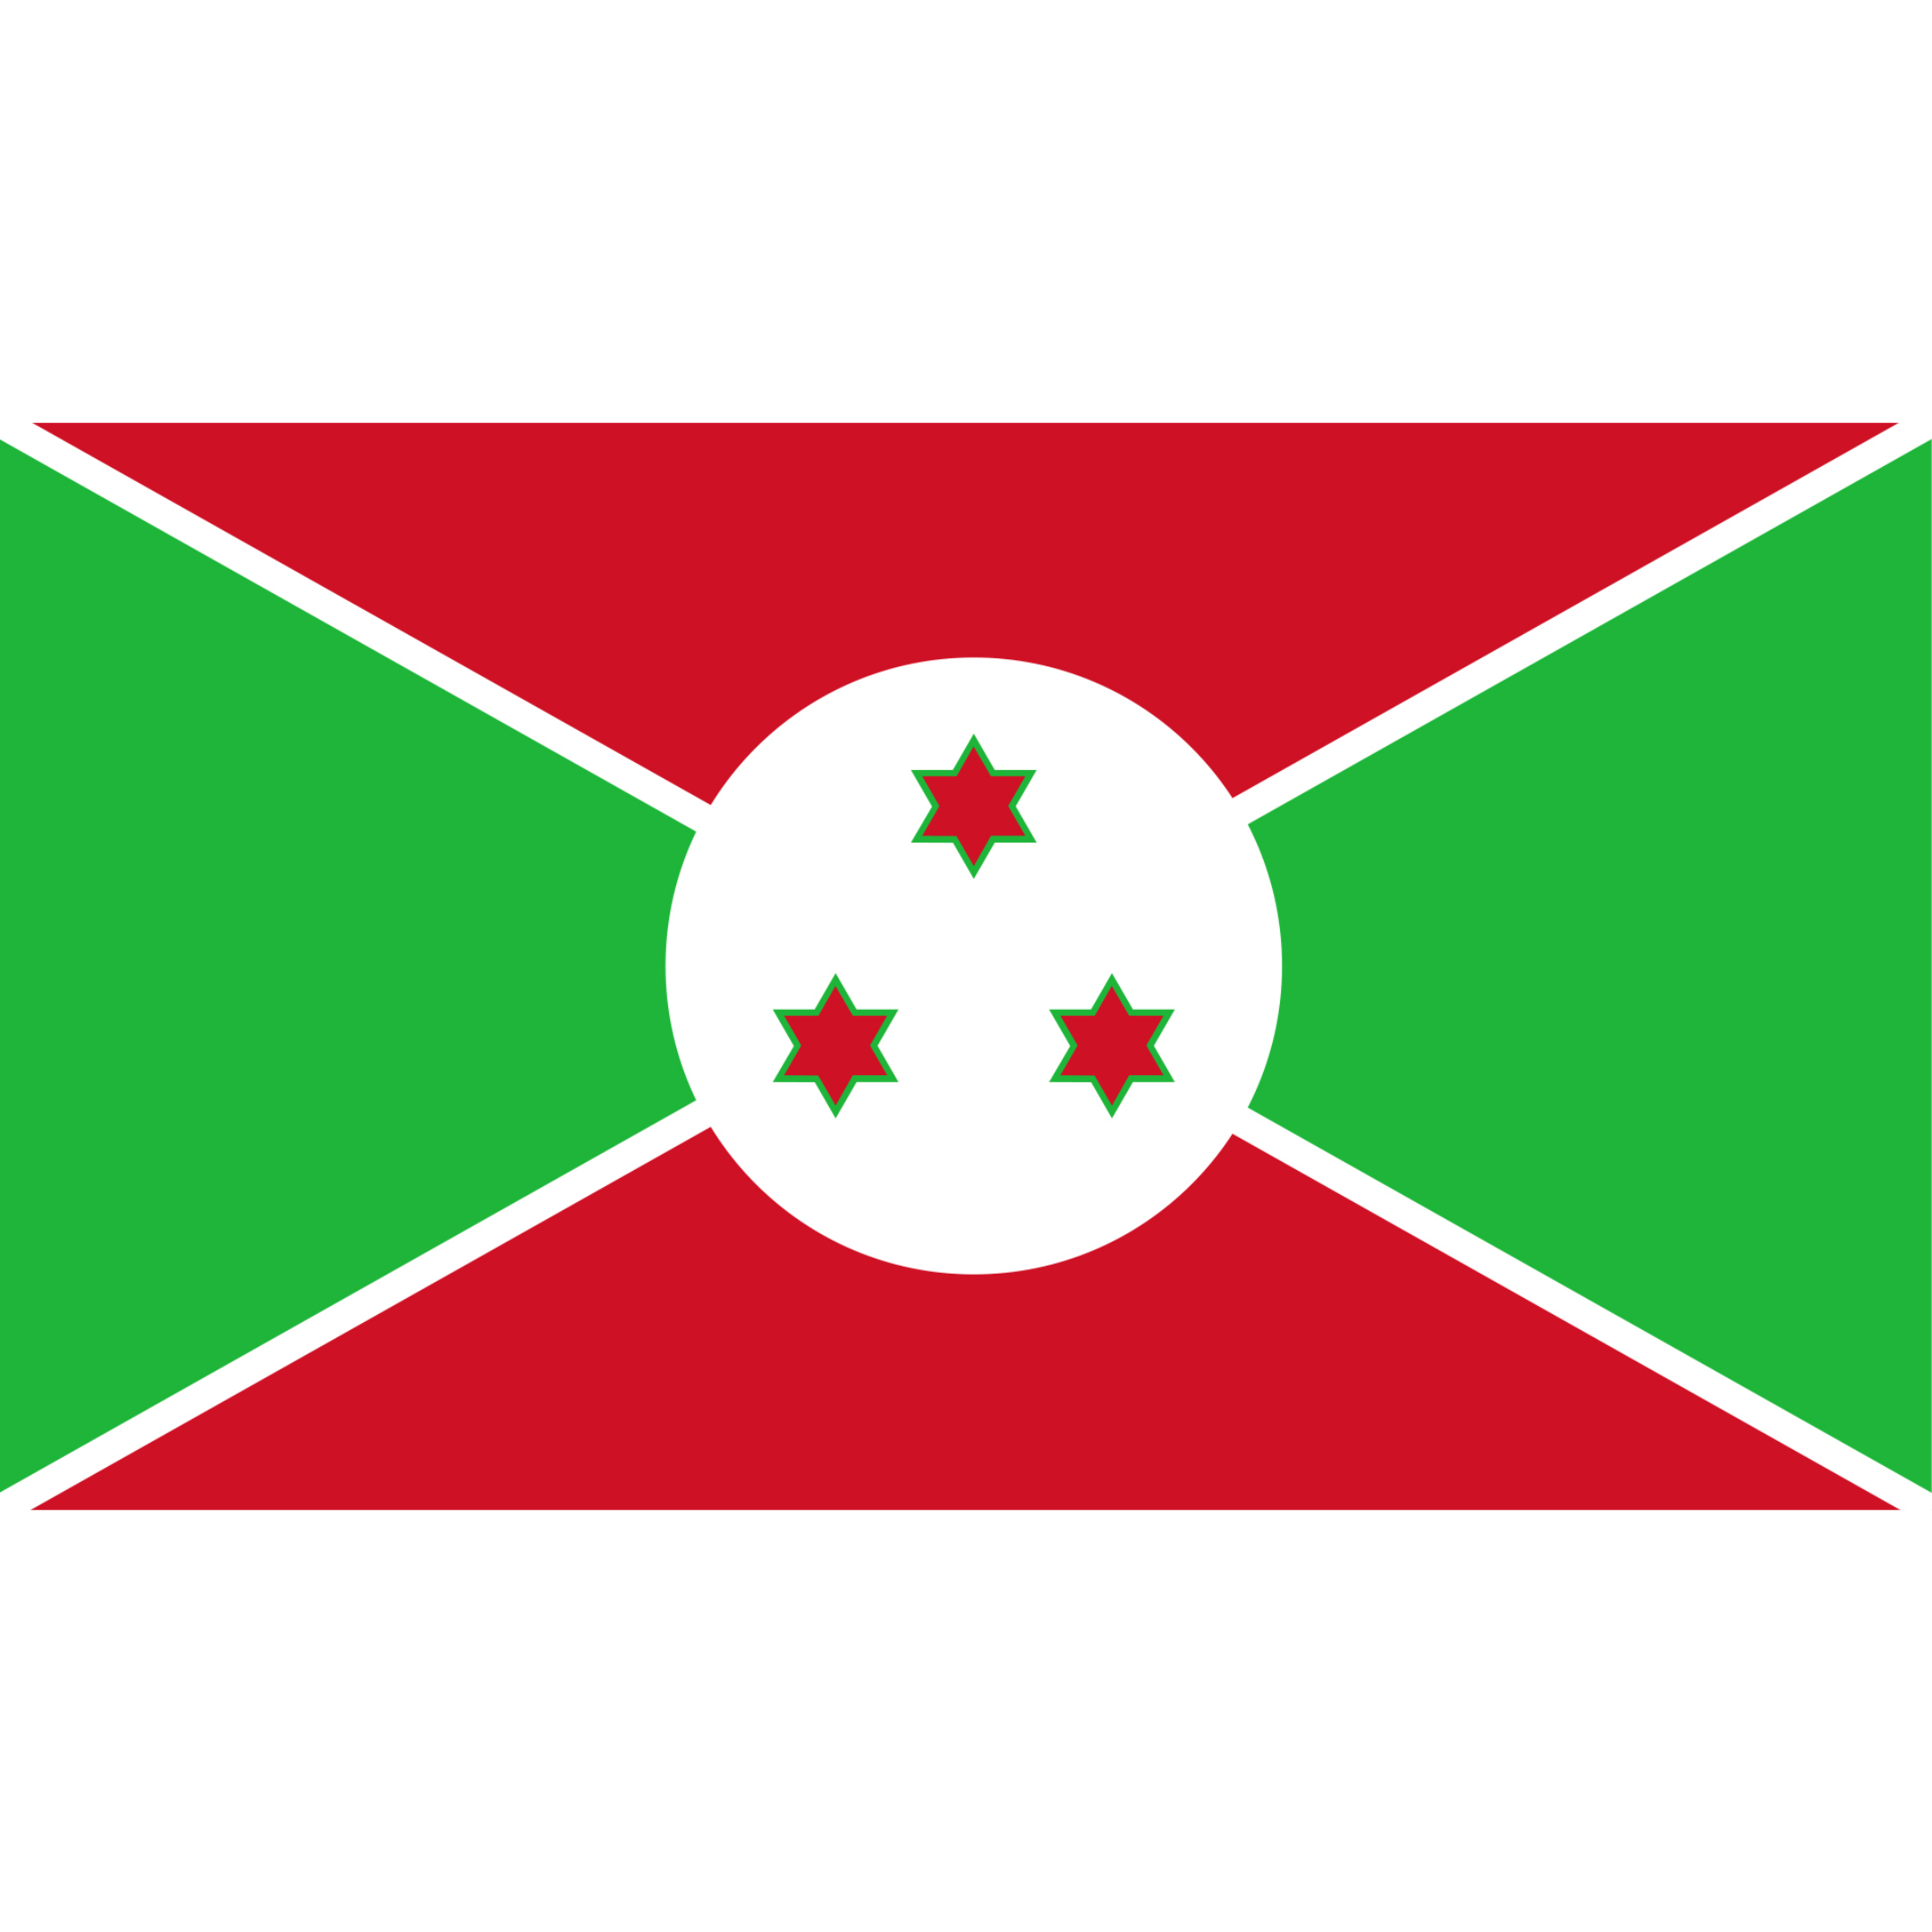 The Burundi flag has a white cross dividing red and green triangles, with a white circle and 6 red stars in the centre.